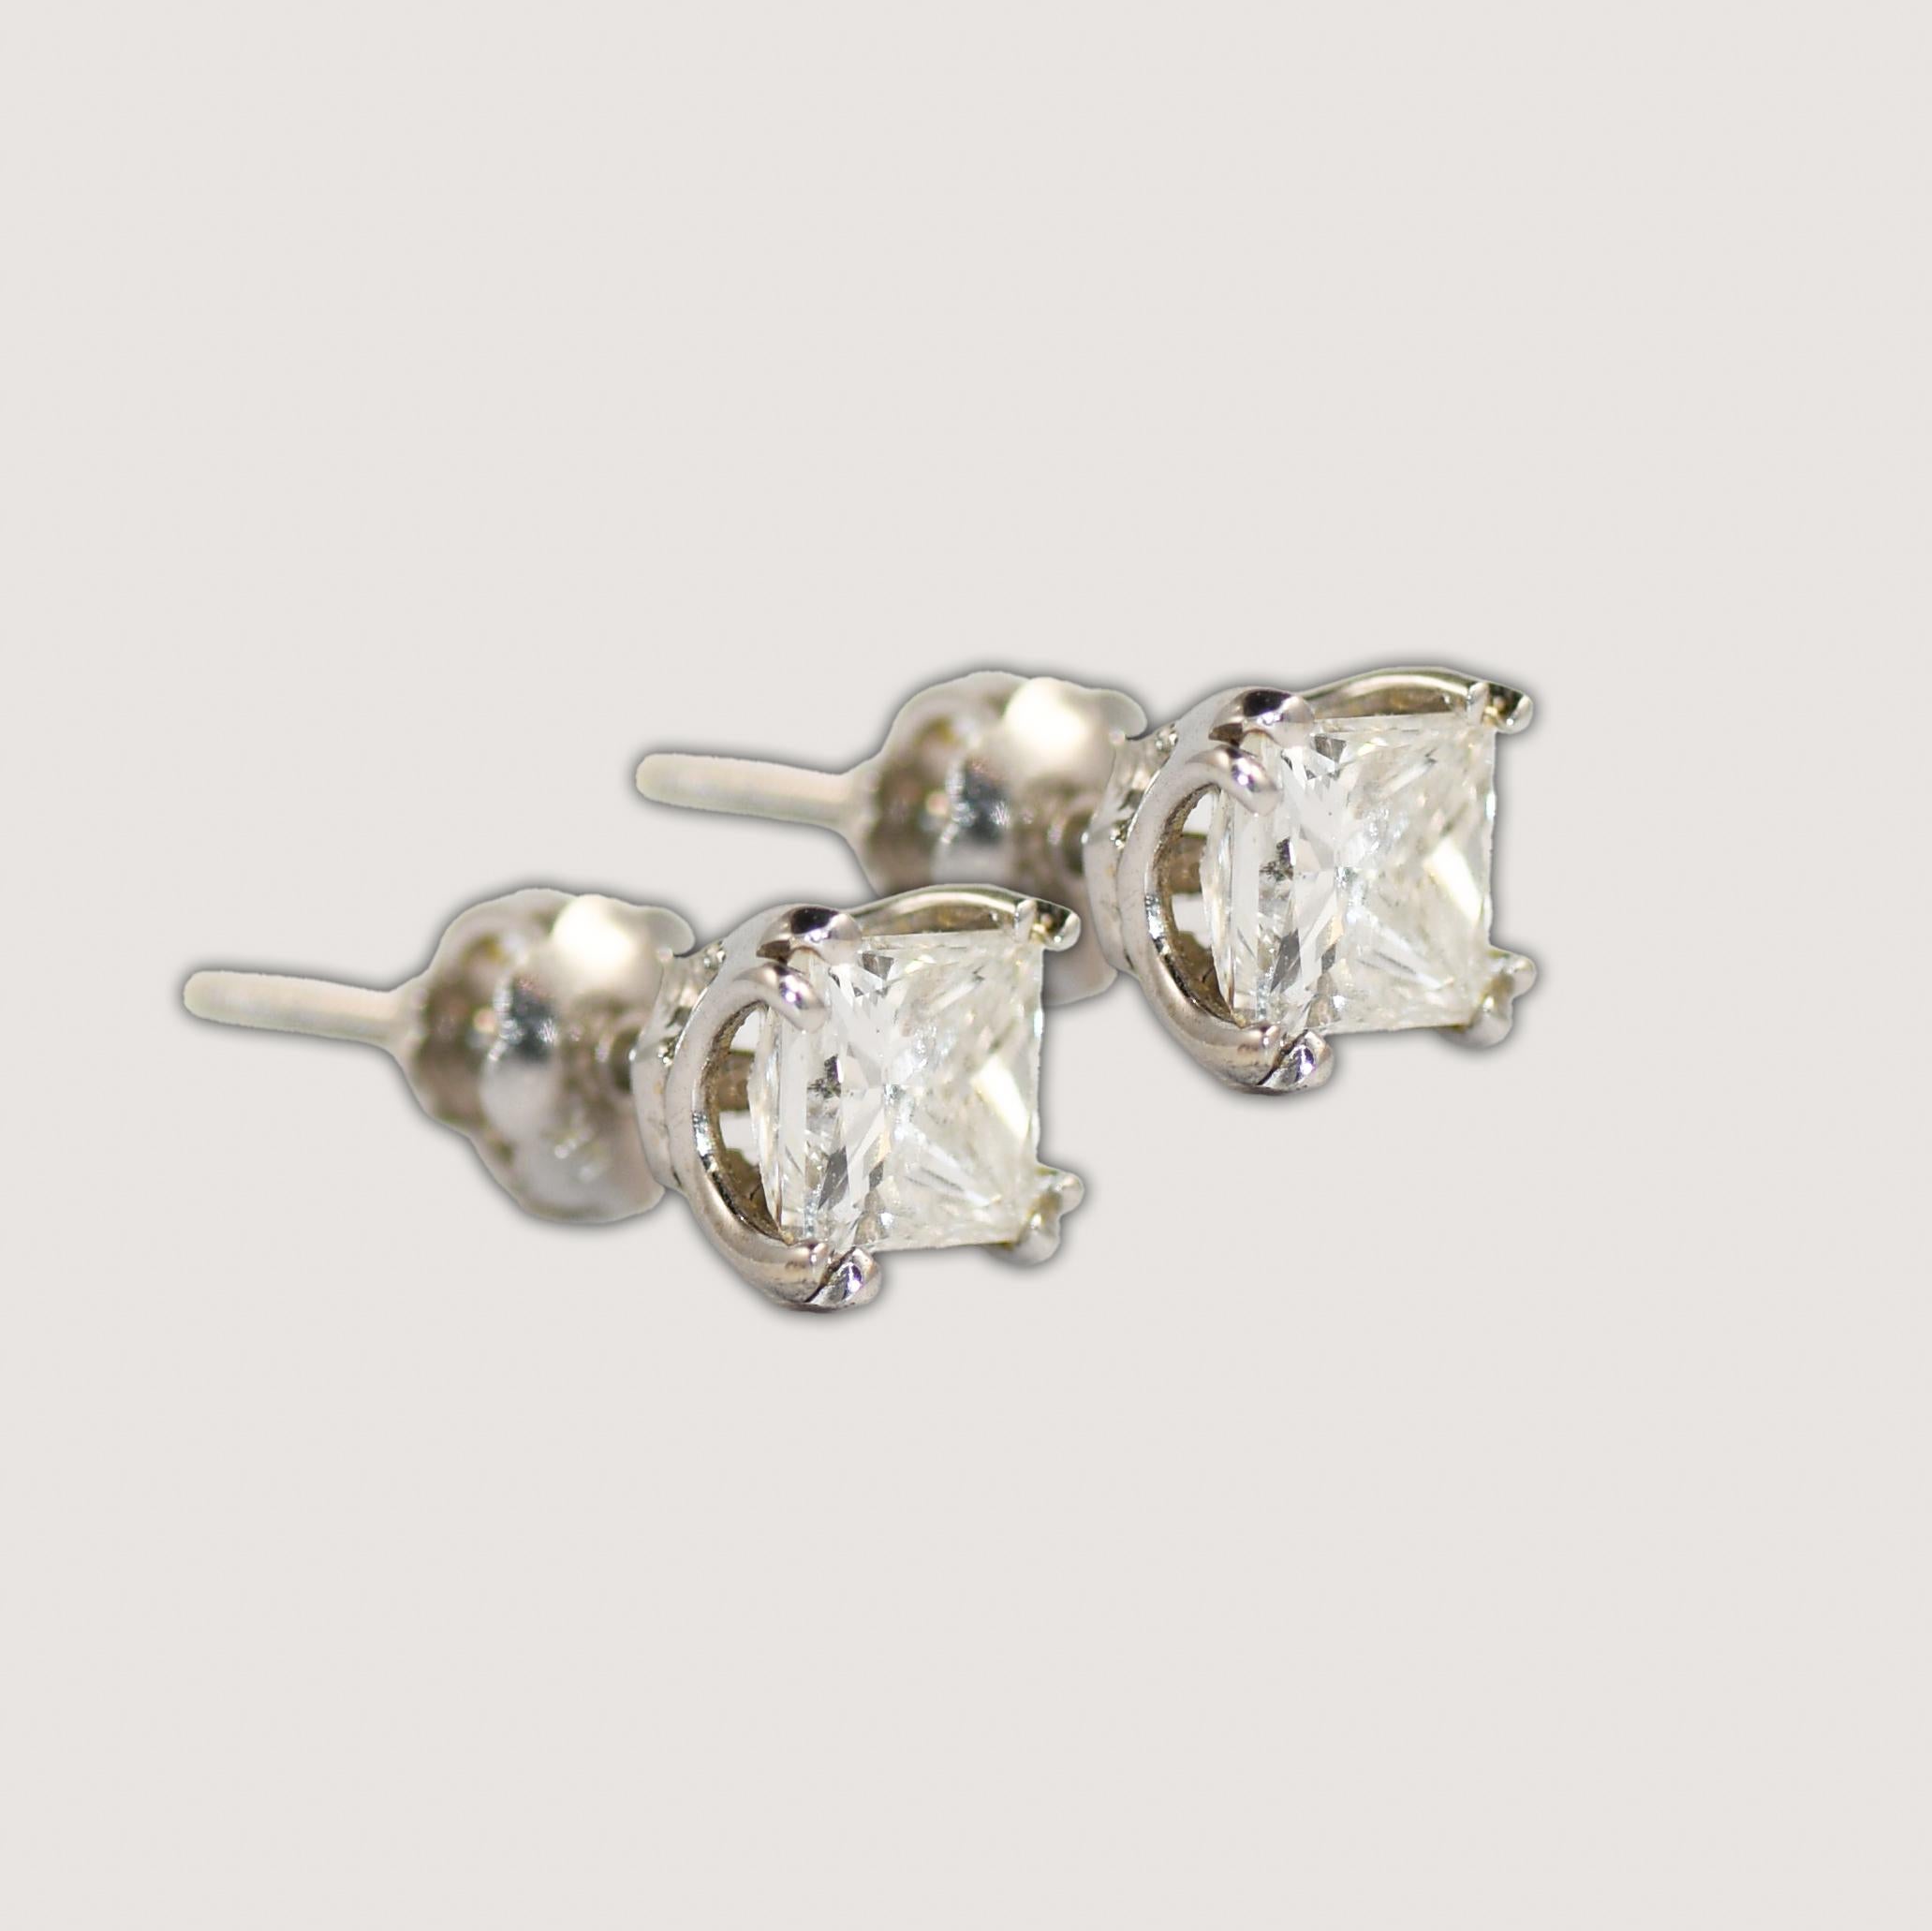 Princess cut diamond stud earrings in 14k white gold.
Stamped 14k and weighs 1.2 grams gross weight.
The diamond is square with a brilliant cut underneath, 1.00 total carats, H to i color, i1 clarity.
The backings have screw-back posts.
Excellent